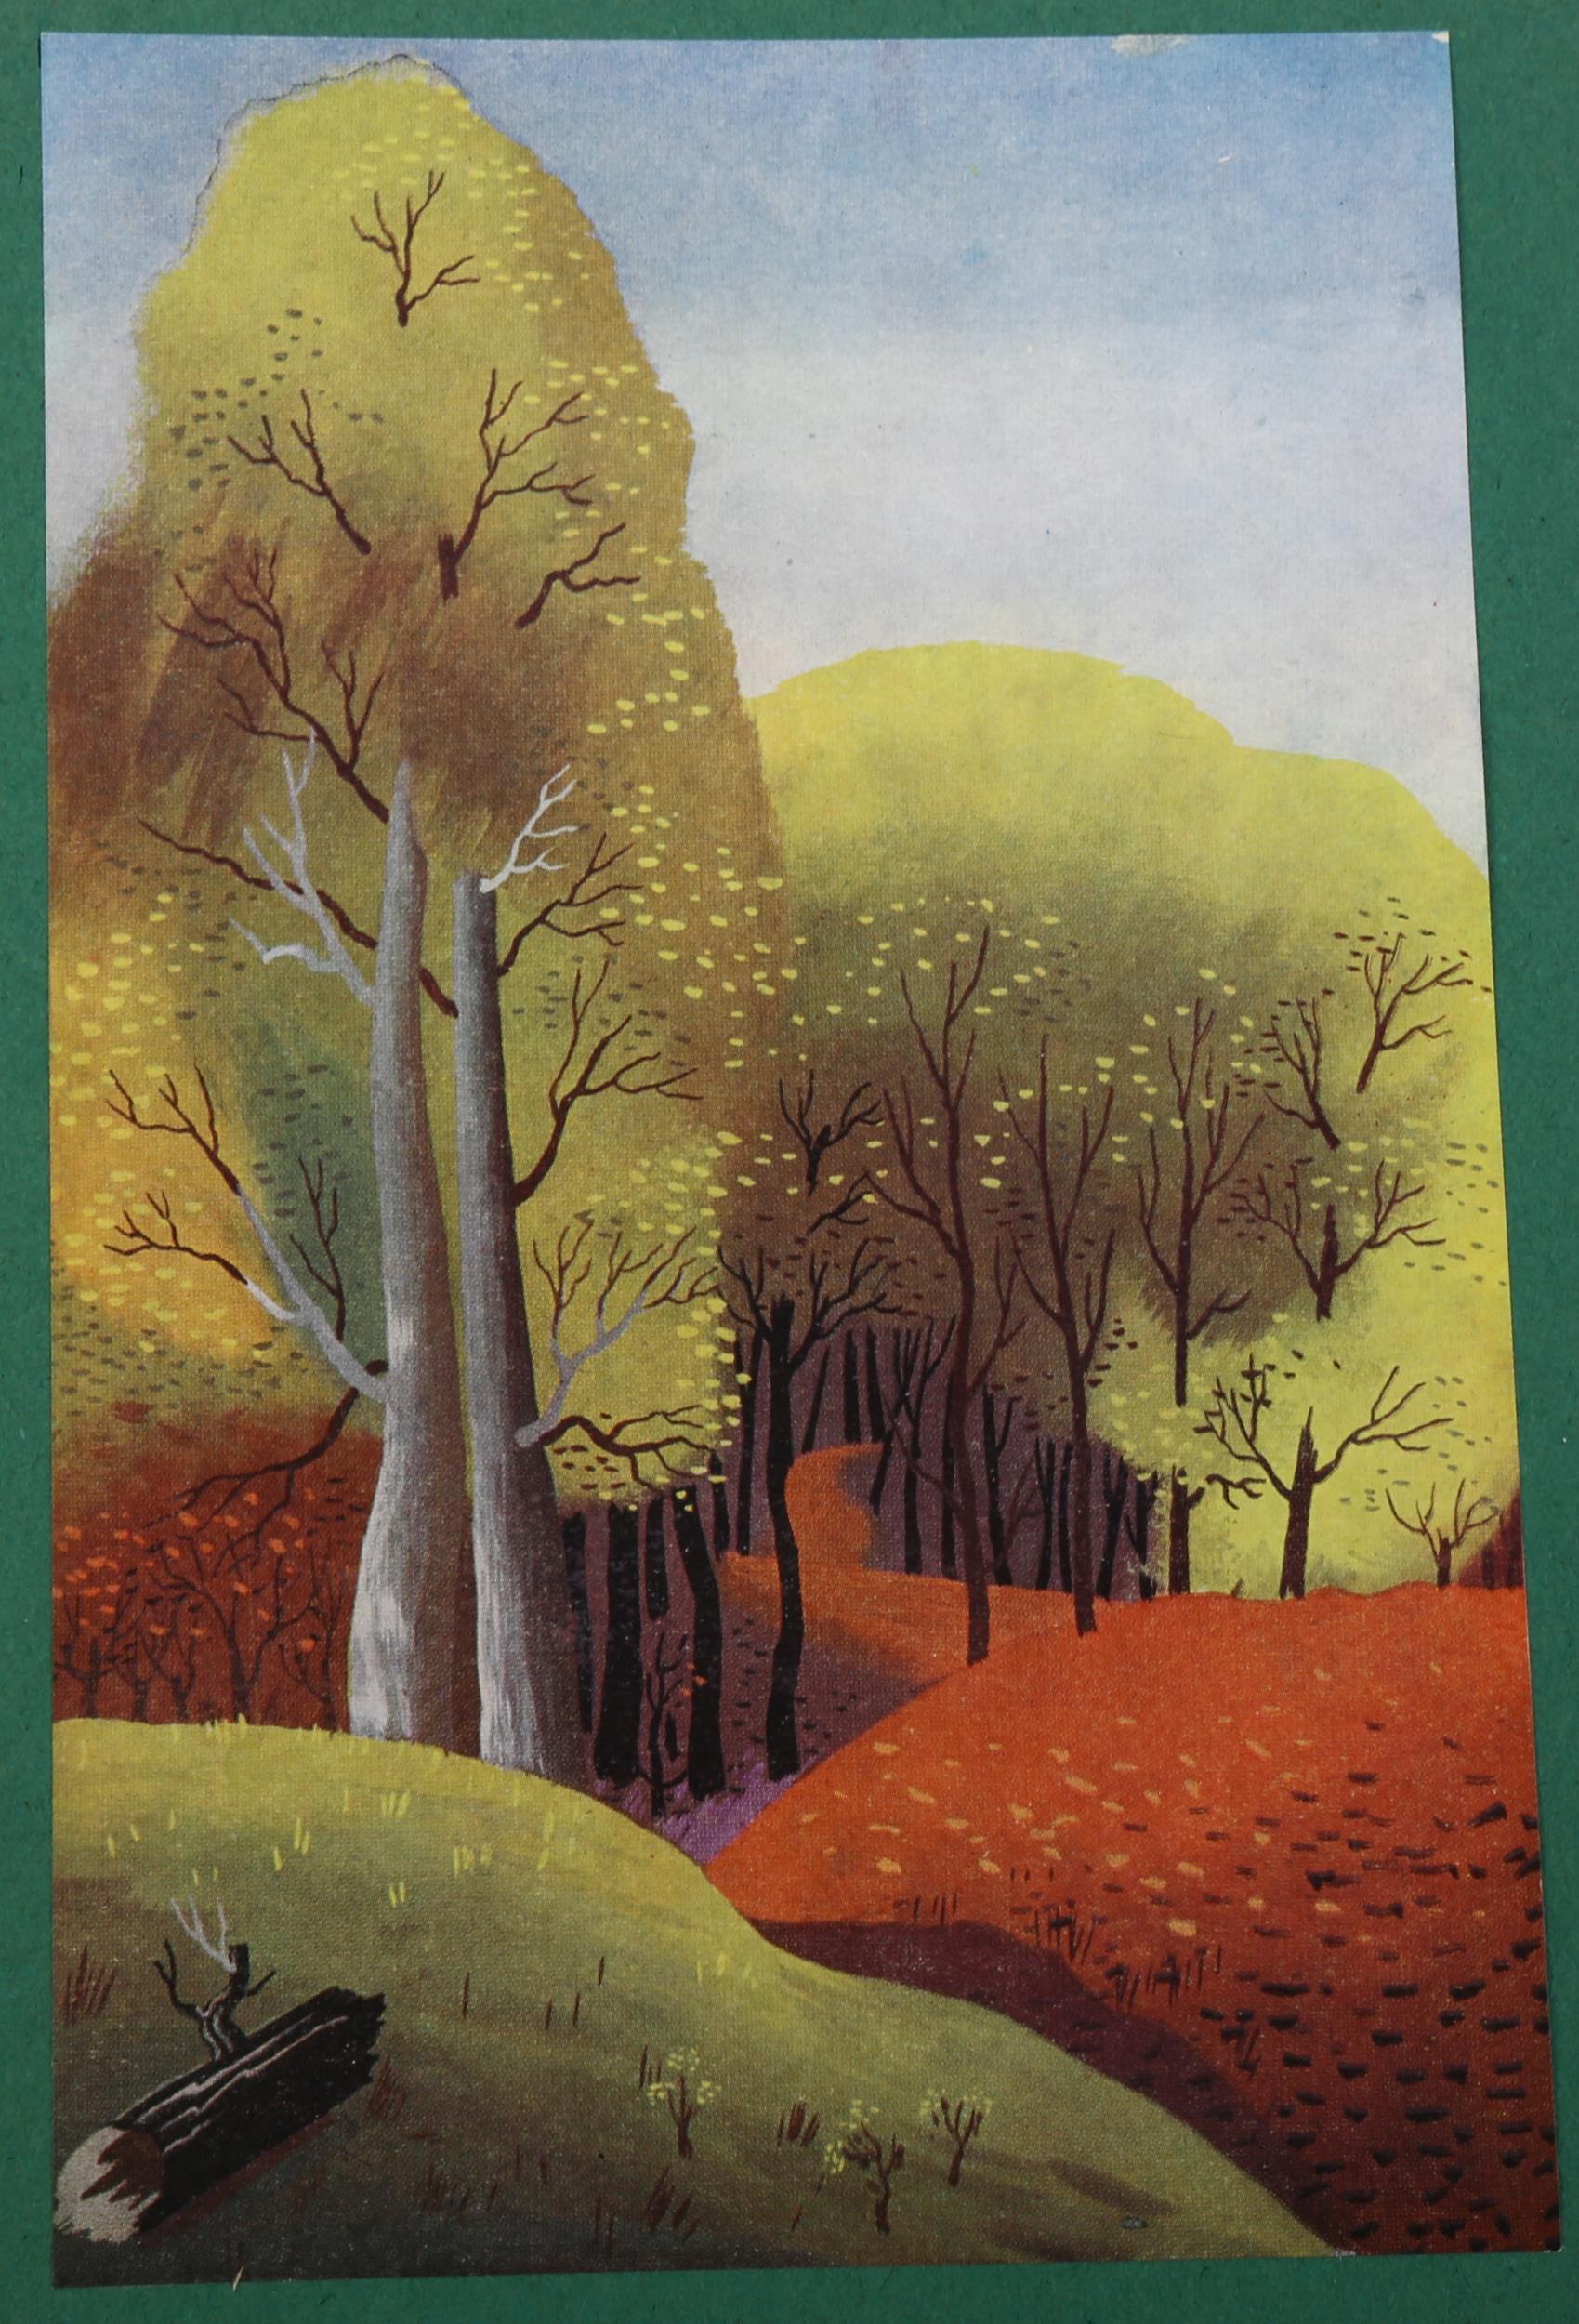 Edward McKnight Kauffer, Woods, 1938 rare commissioned mini poster for Transport For London, 23cm